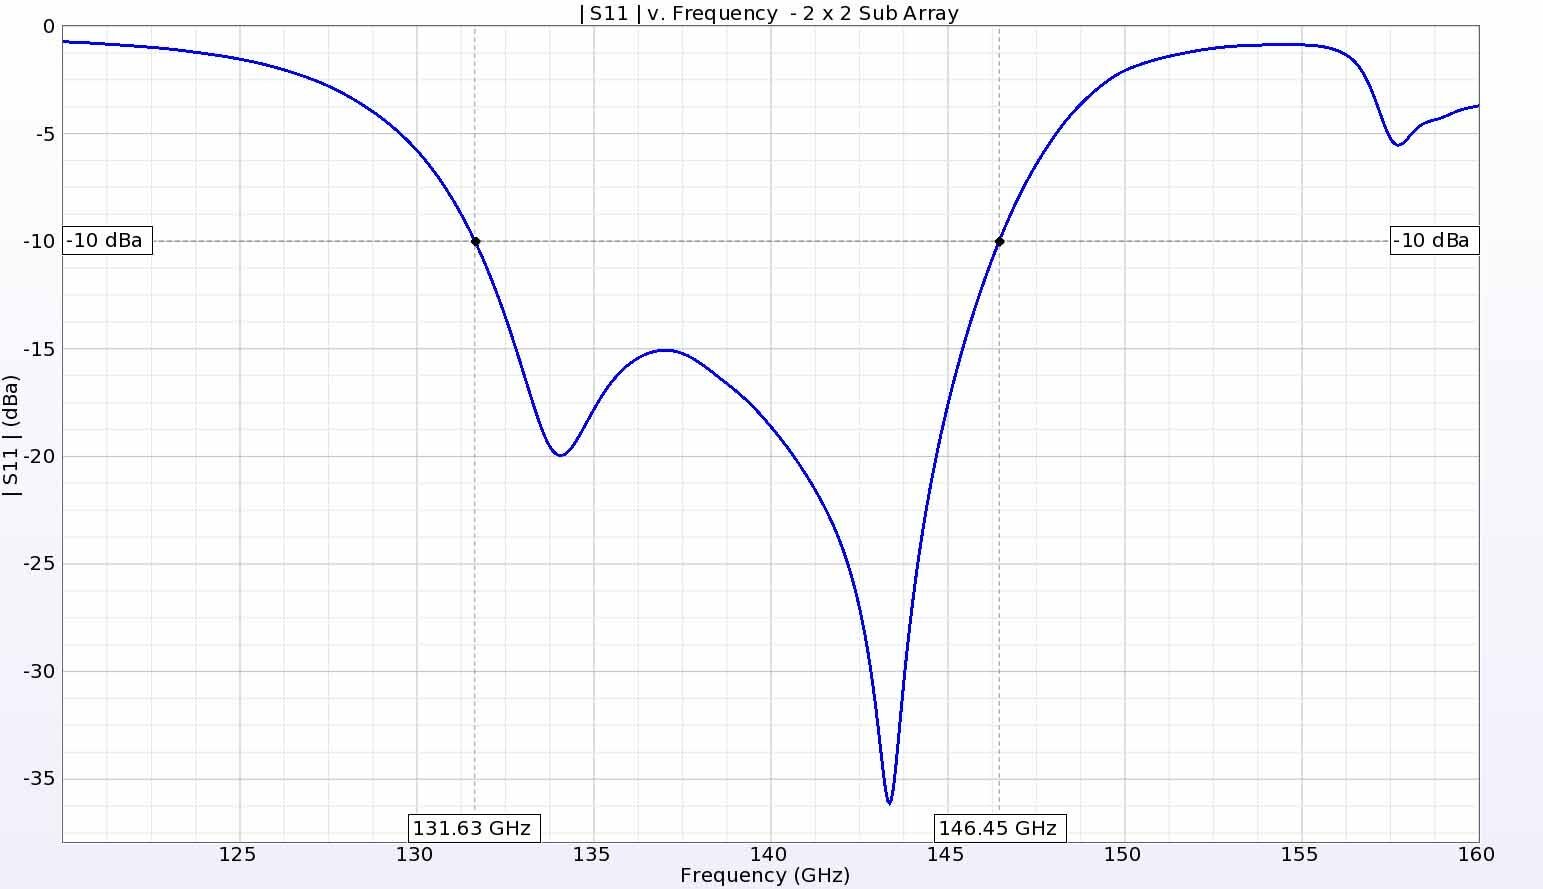 Figure 5:  The return loss for a single 2x2 antenna element shows good performance below -10 dB from about 132 GHz to 146 GHz.